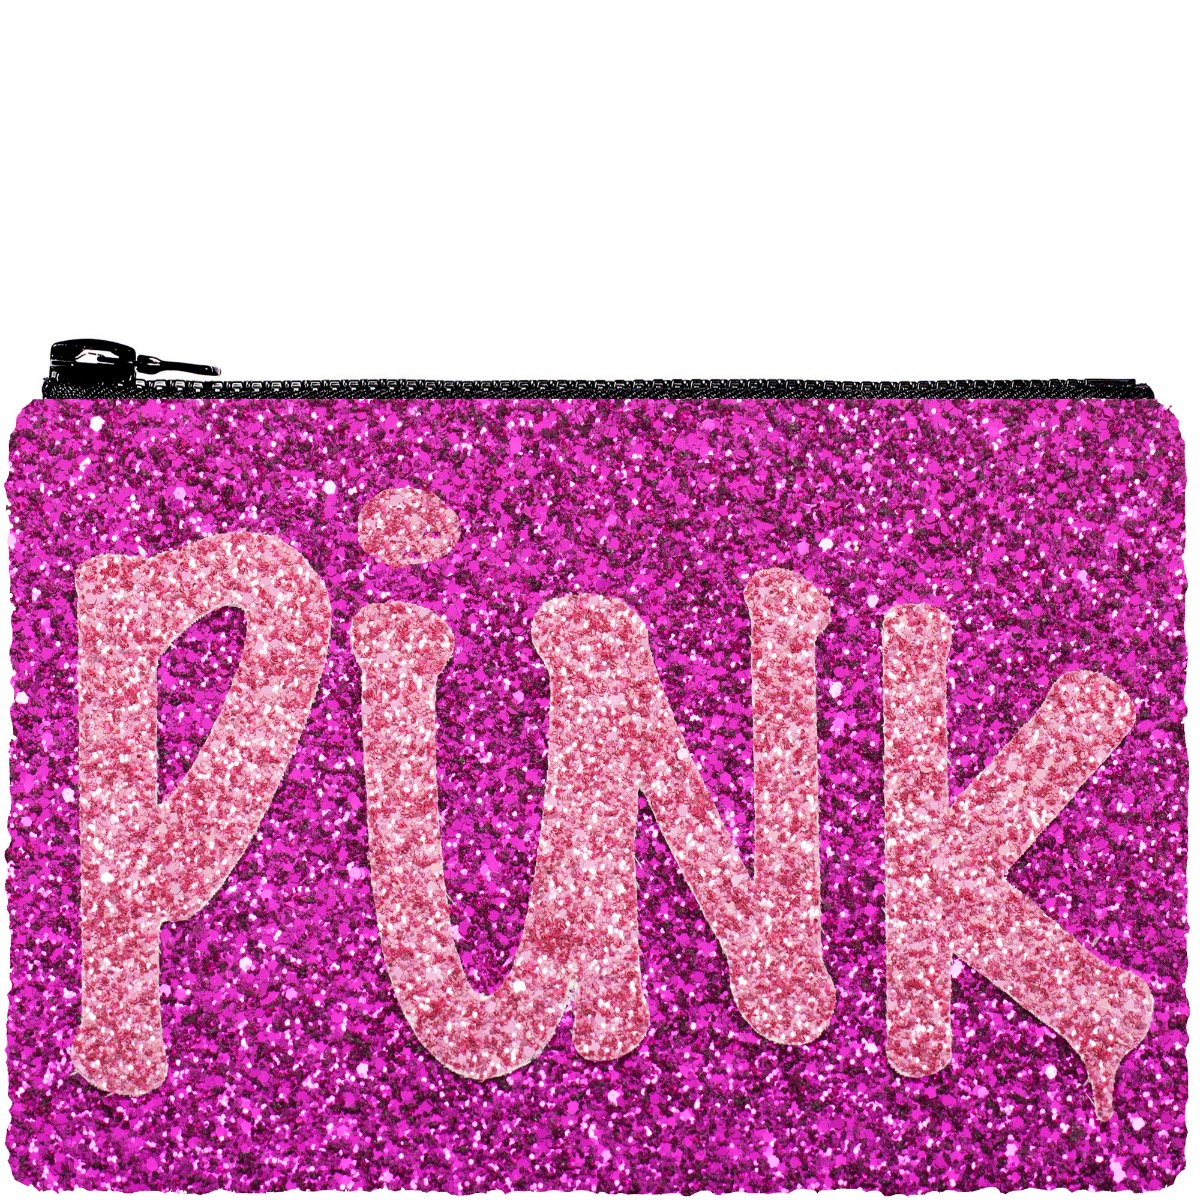 i-know-the-queen-pink-punk-glitter-clutch-bag